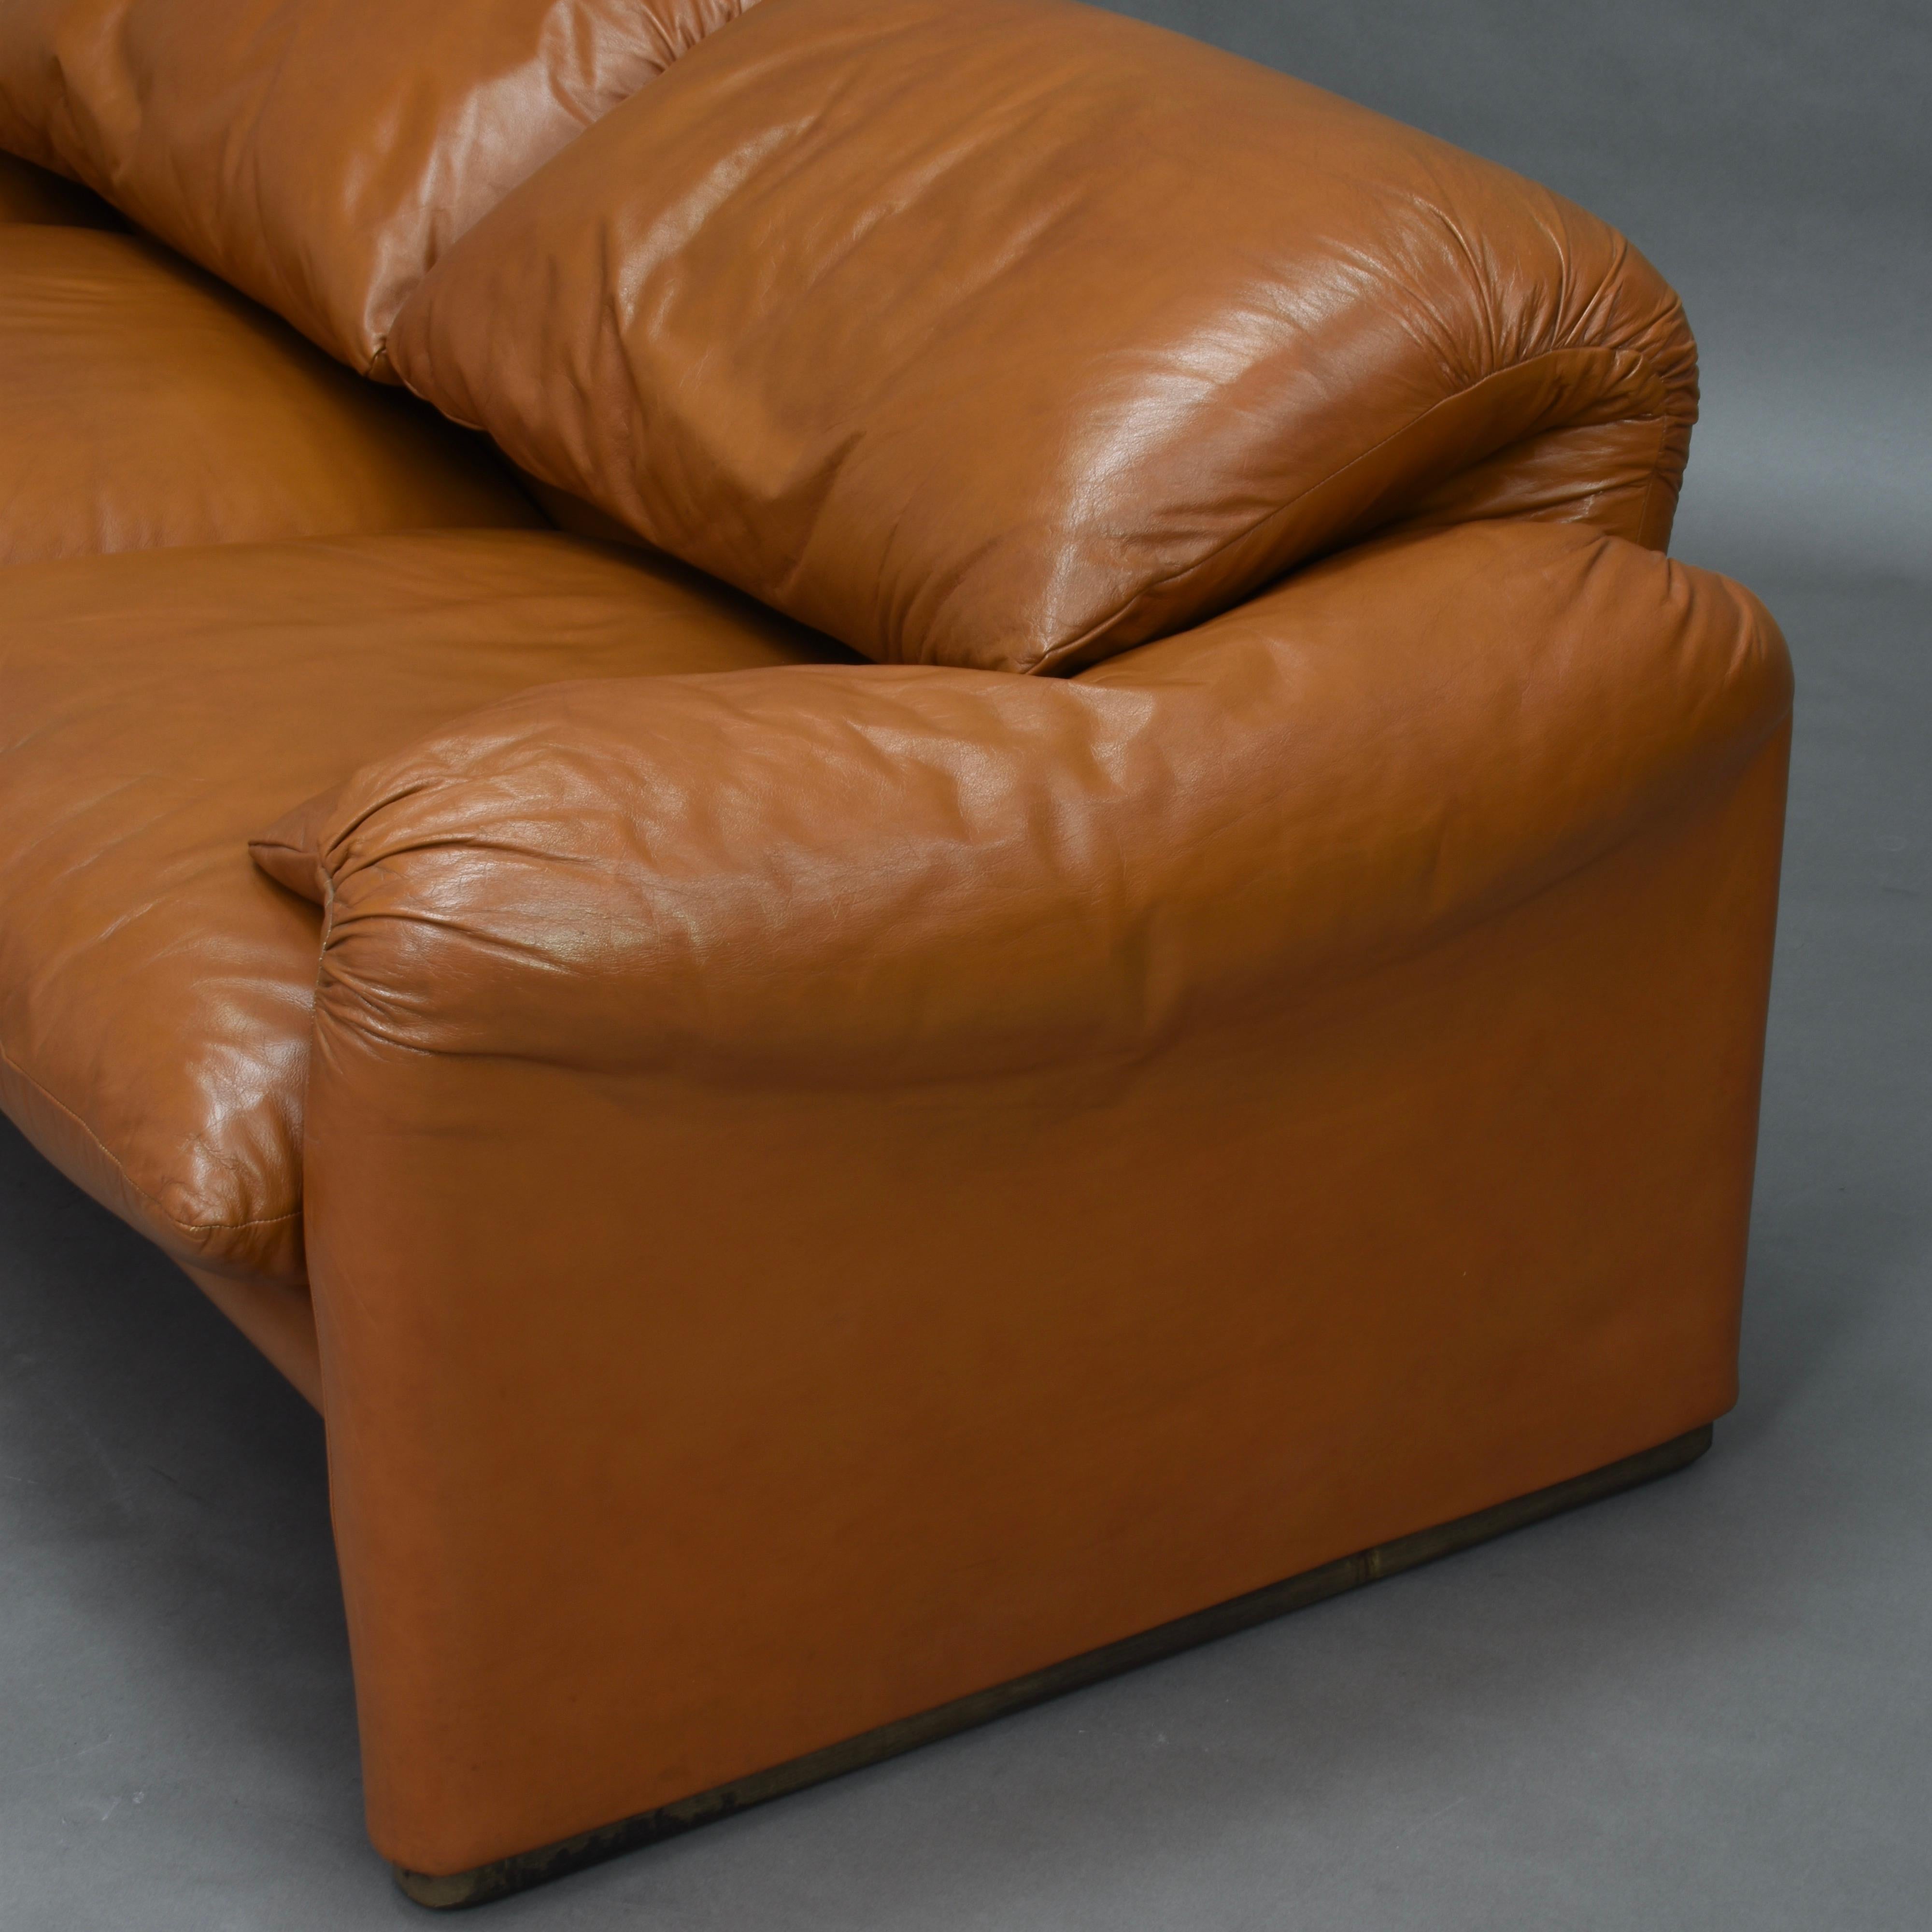 Early Maralunga Sofa in Tan Leather by Vico Magistretti for Cassina, Italy, 1973 4